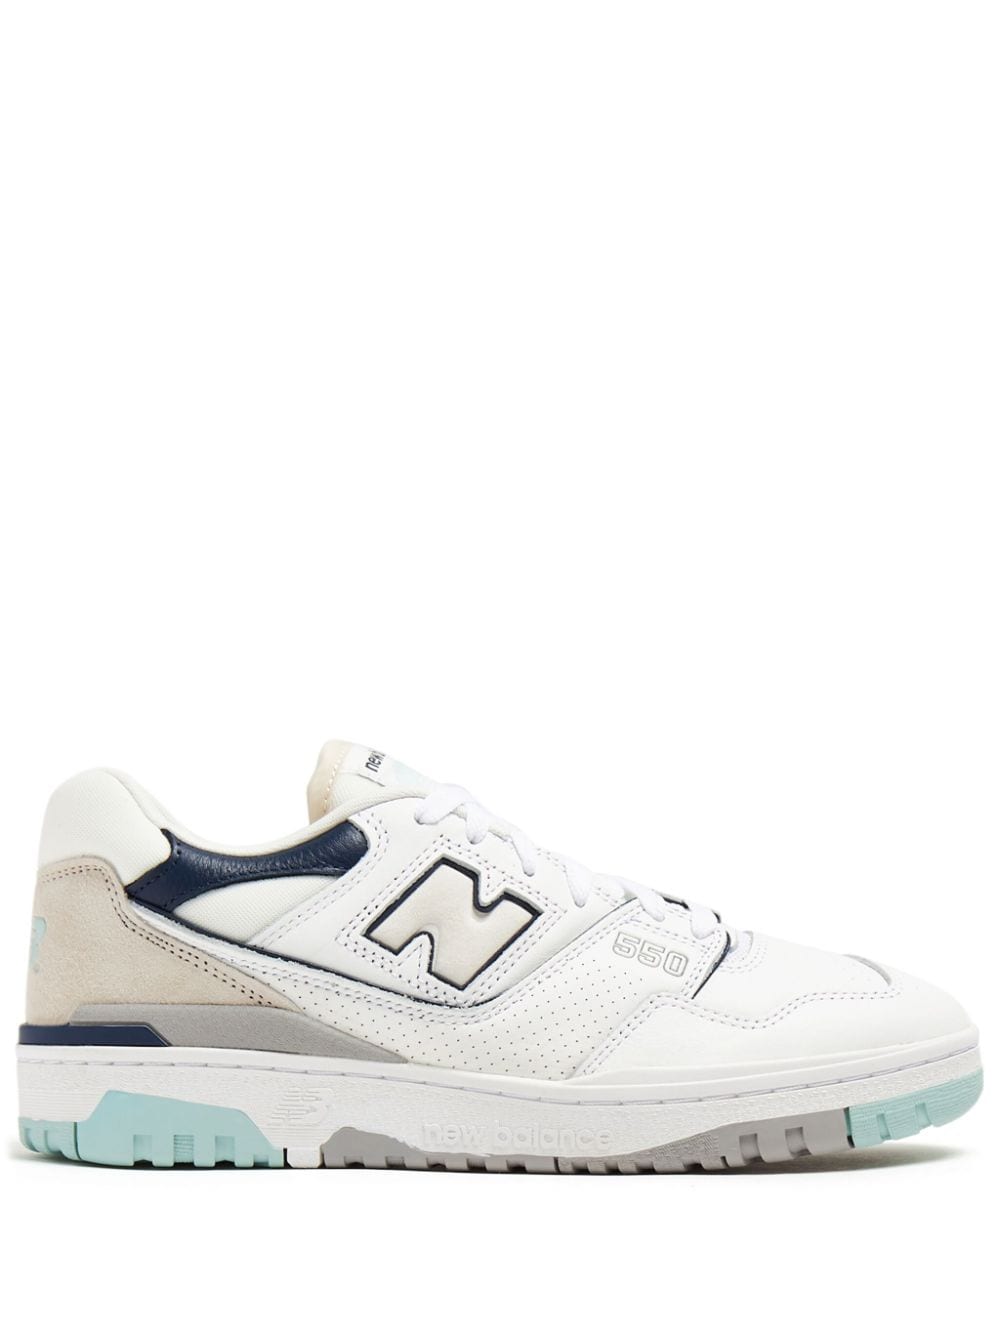 New Balance 550 Leather Sneakers In White